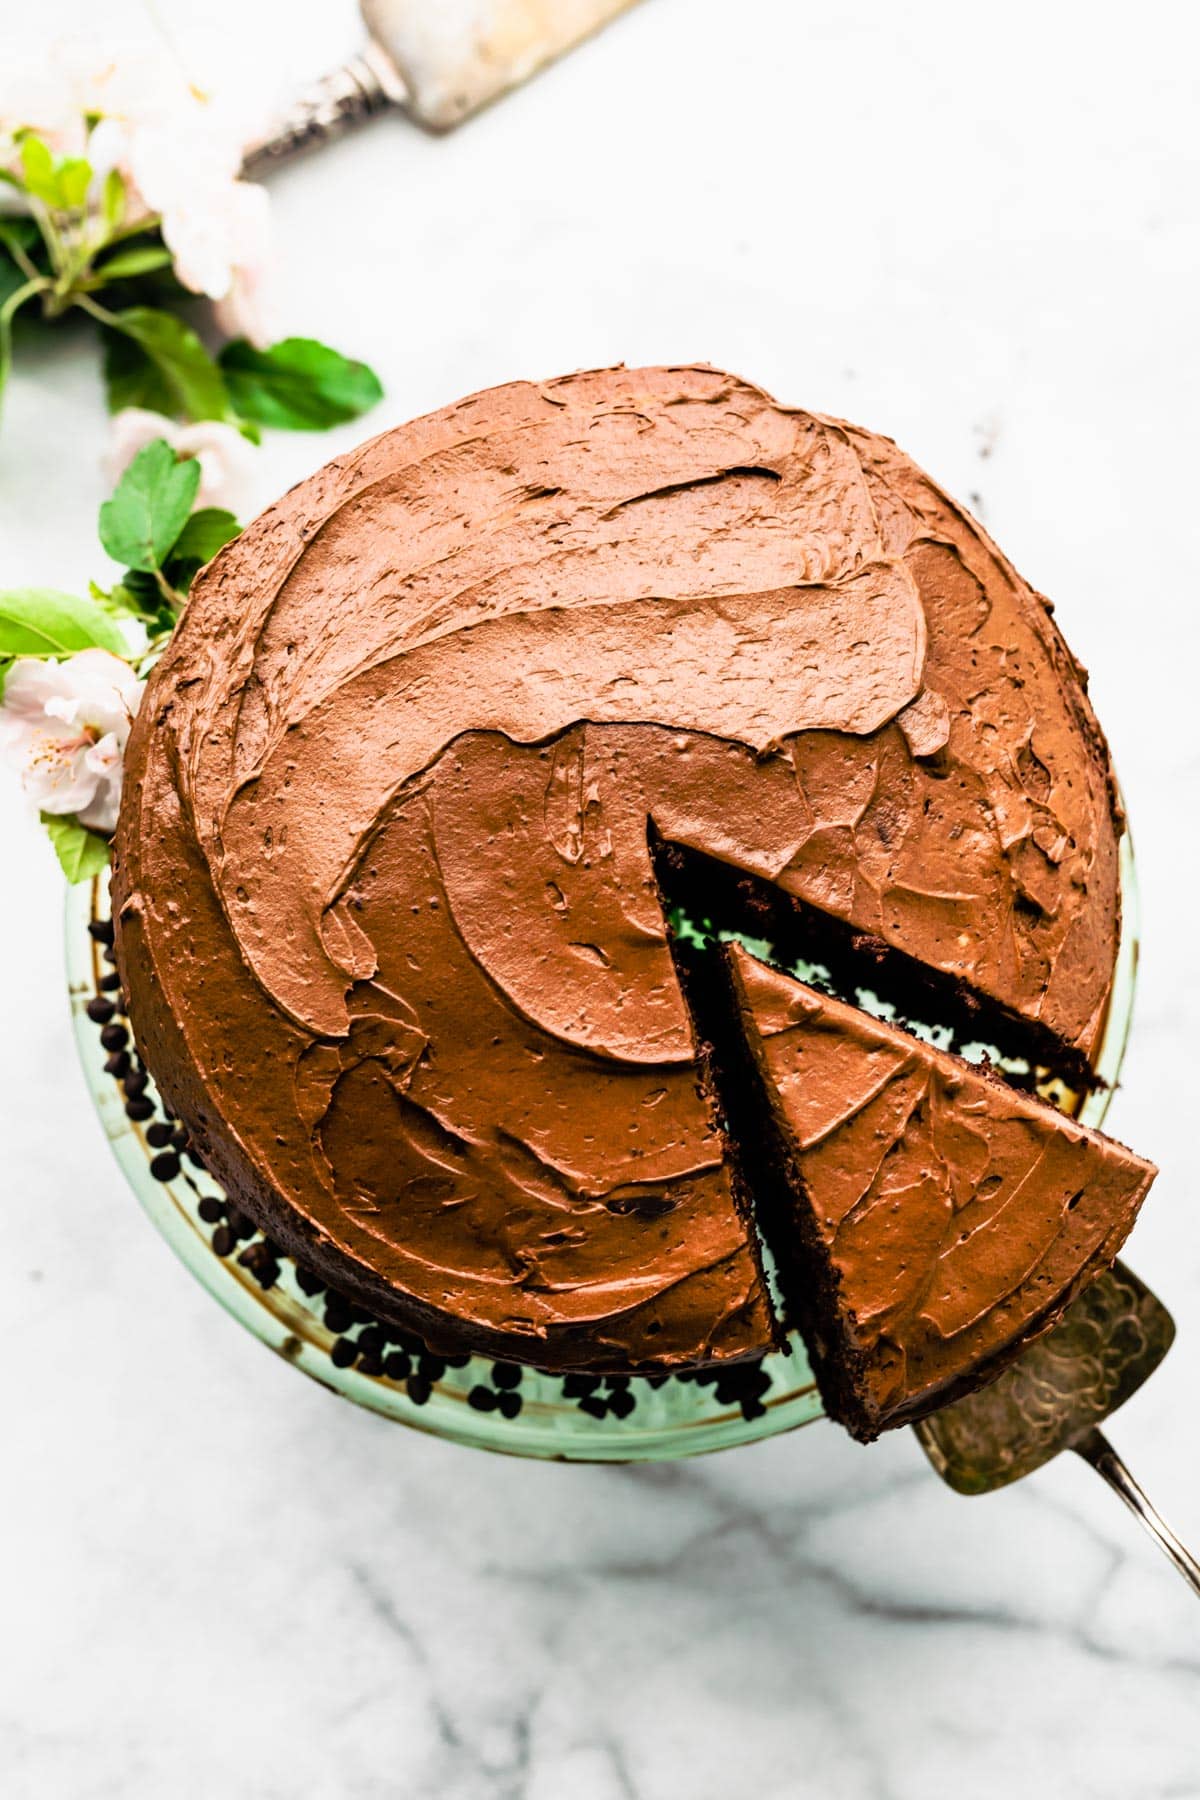 Overhead image of a gluten free chocolate cake with a sliced being lifted.